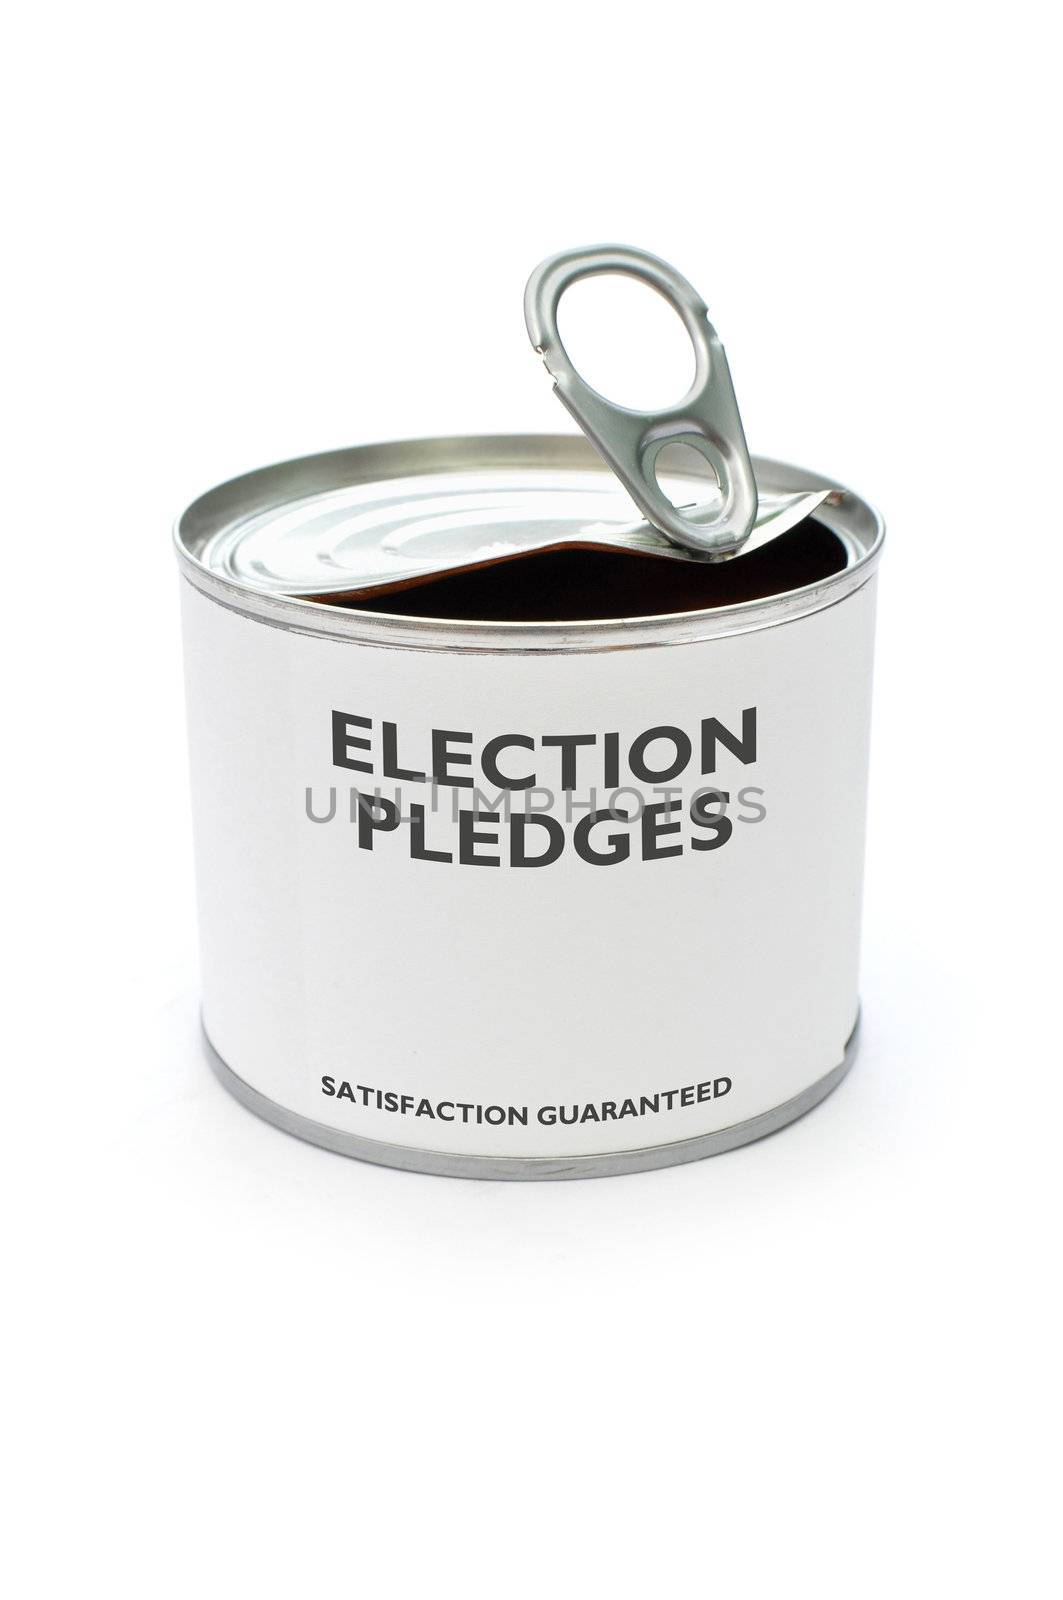 Election pledges printed on a tin can 